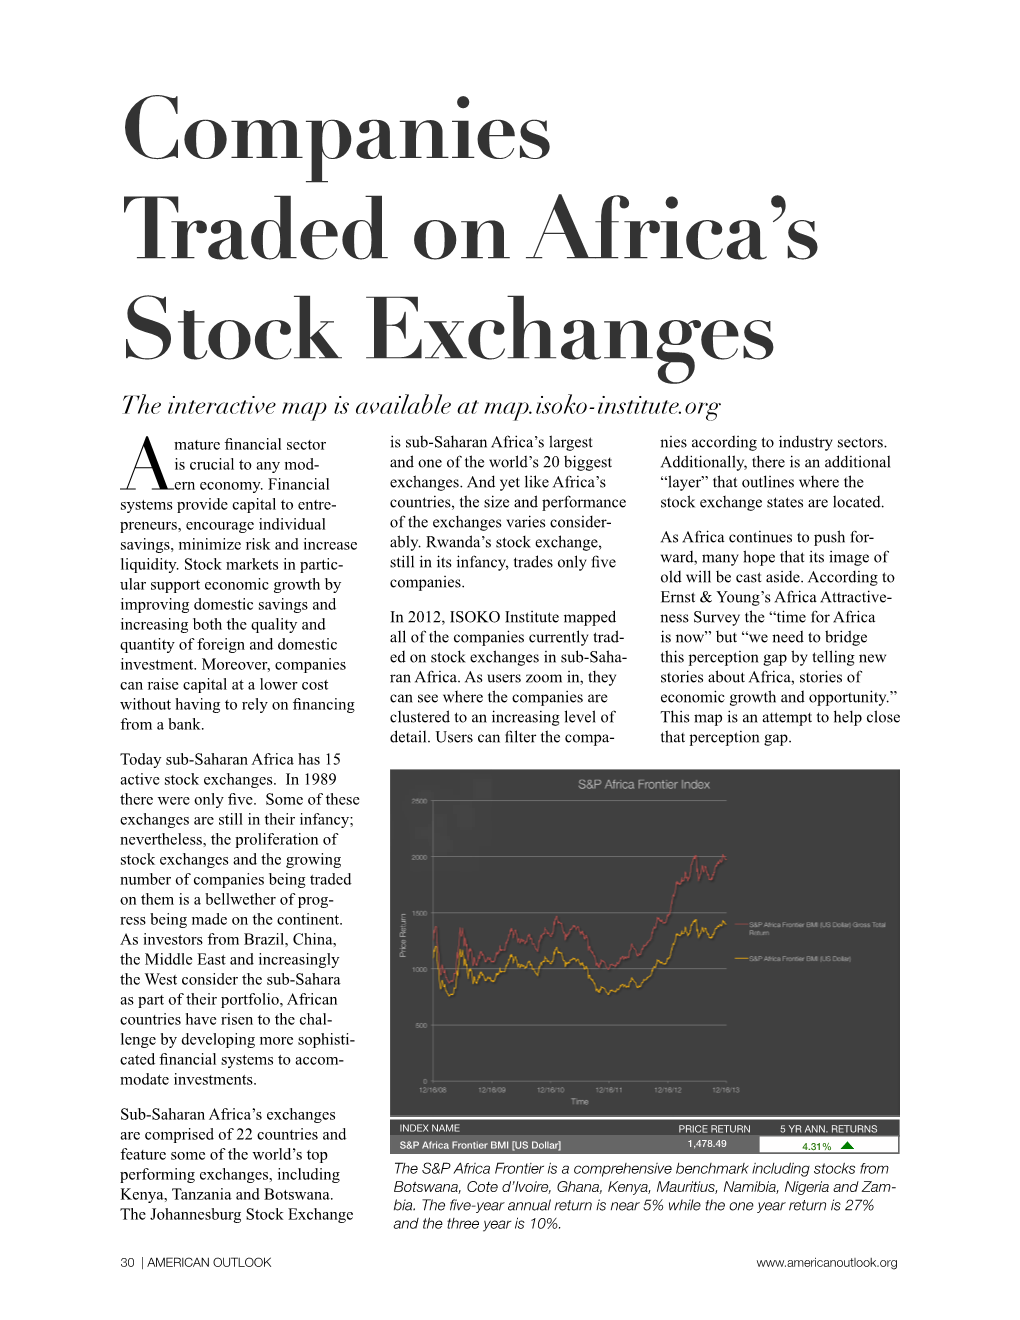 Companies Traded on Africa's Stock Exchanges